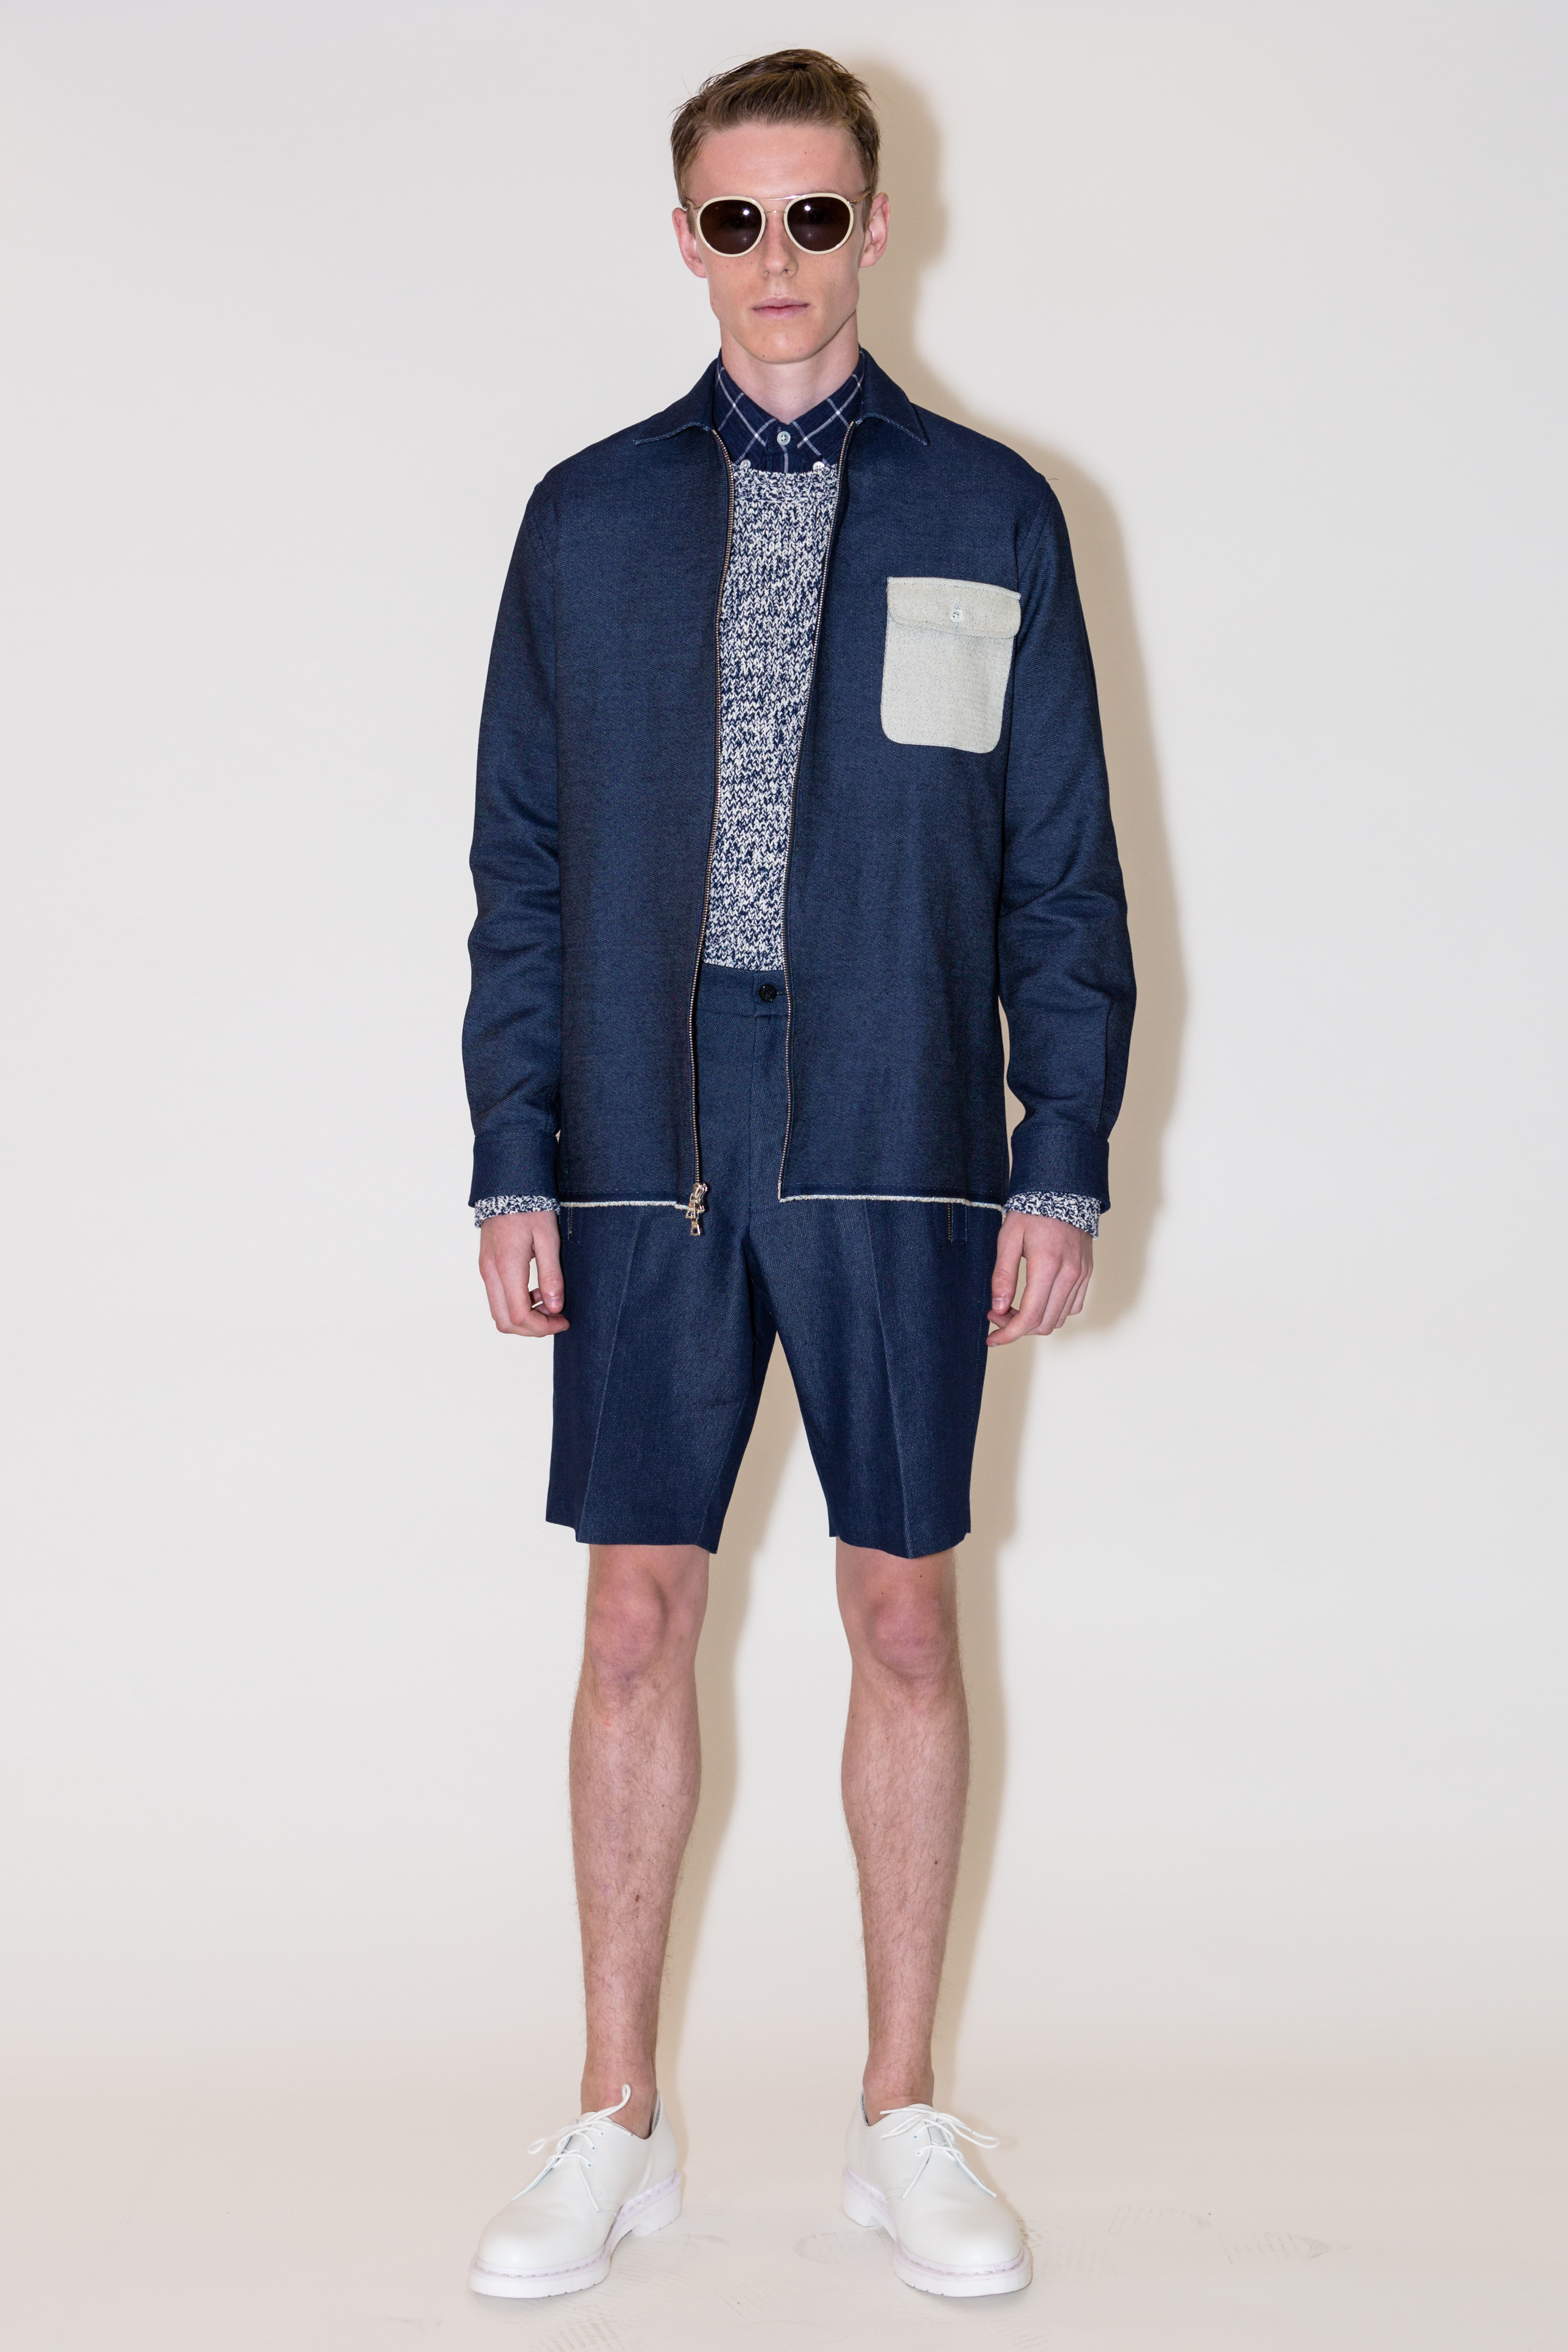 Timo Weiland Spring 2016 - Daily Front Row